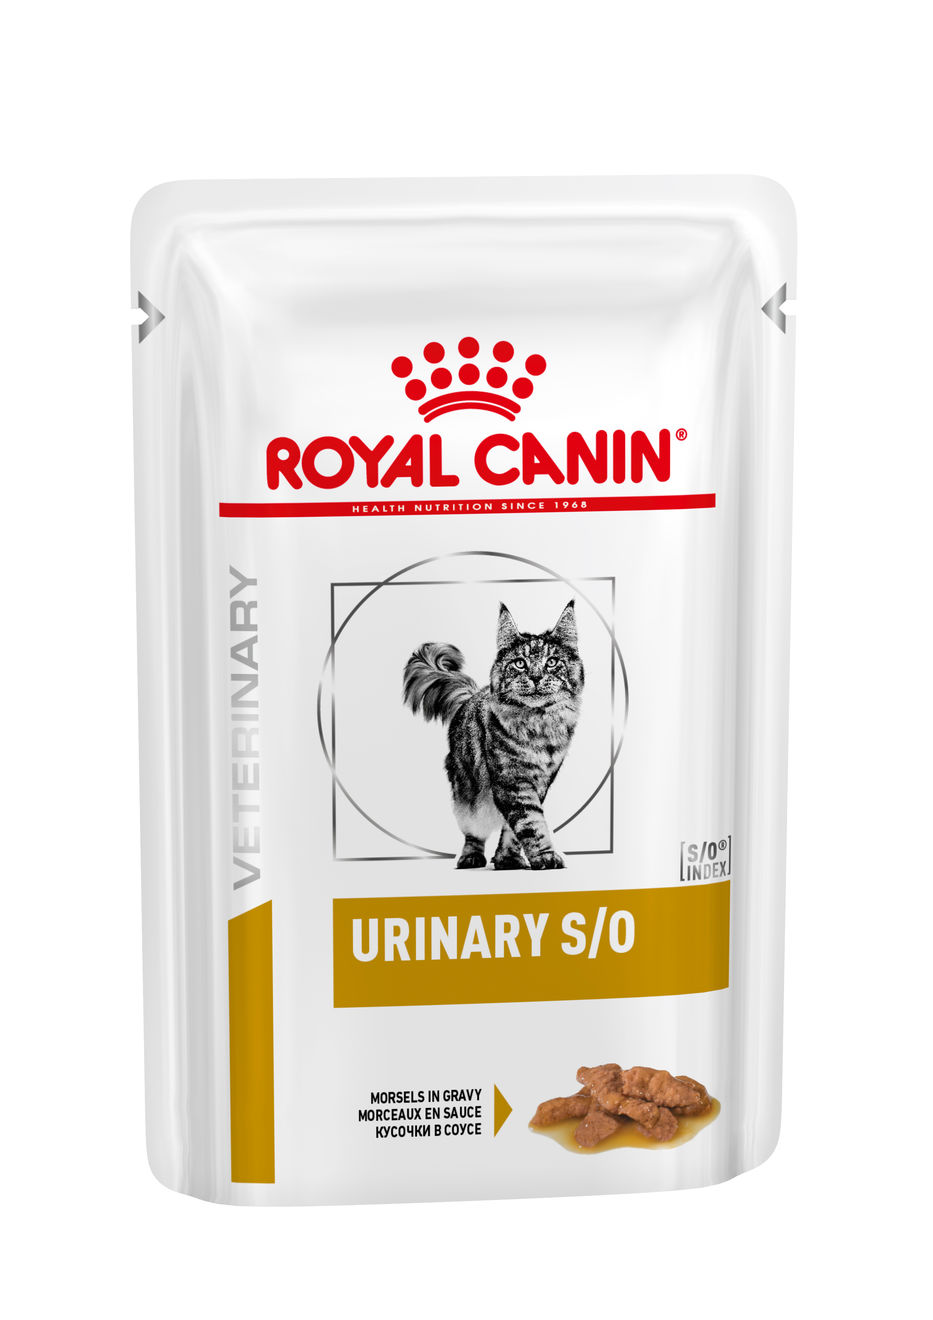 Royal Canin urinary S/O Diet  morsels in gravy  3x 12 (36) x85 gram